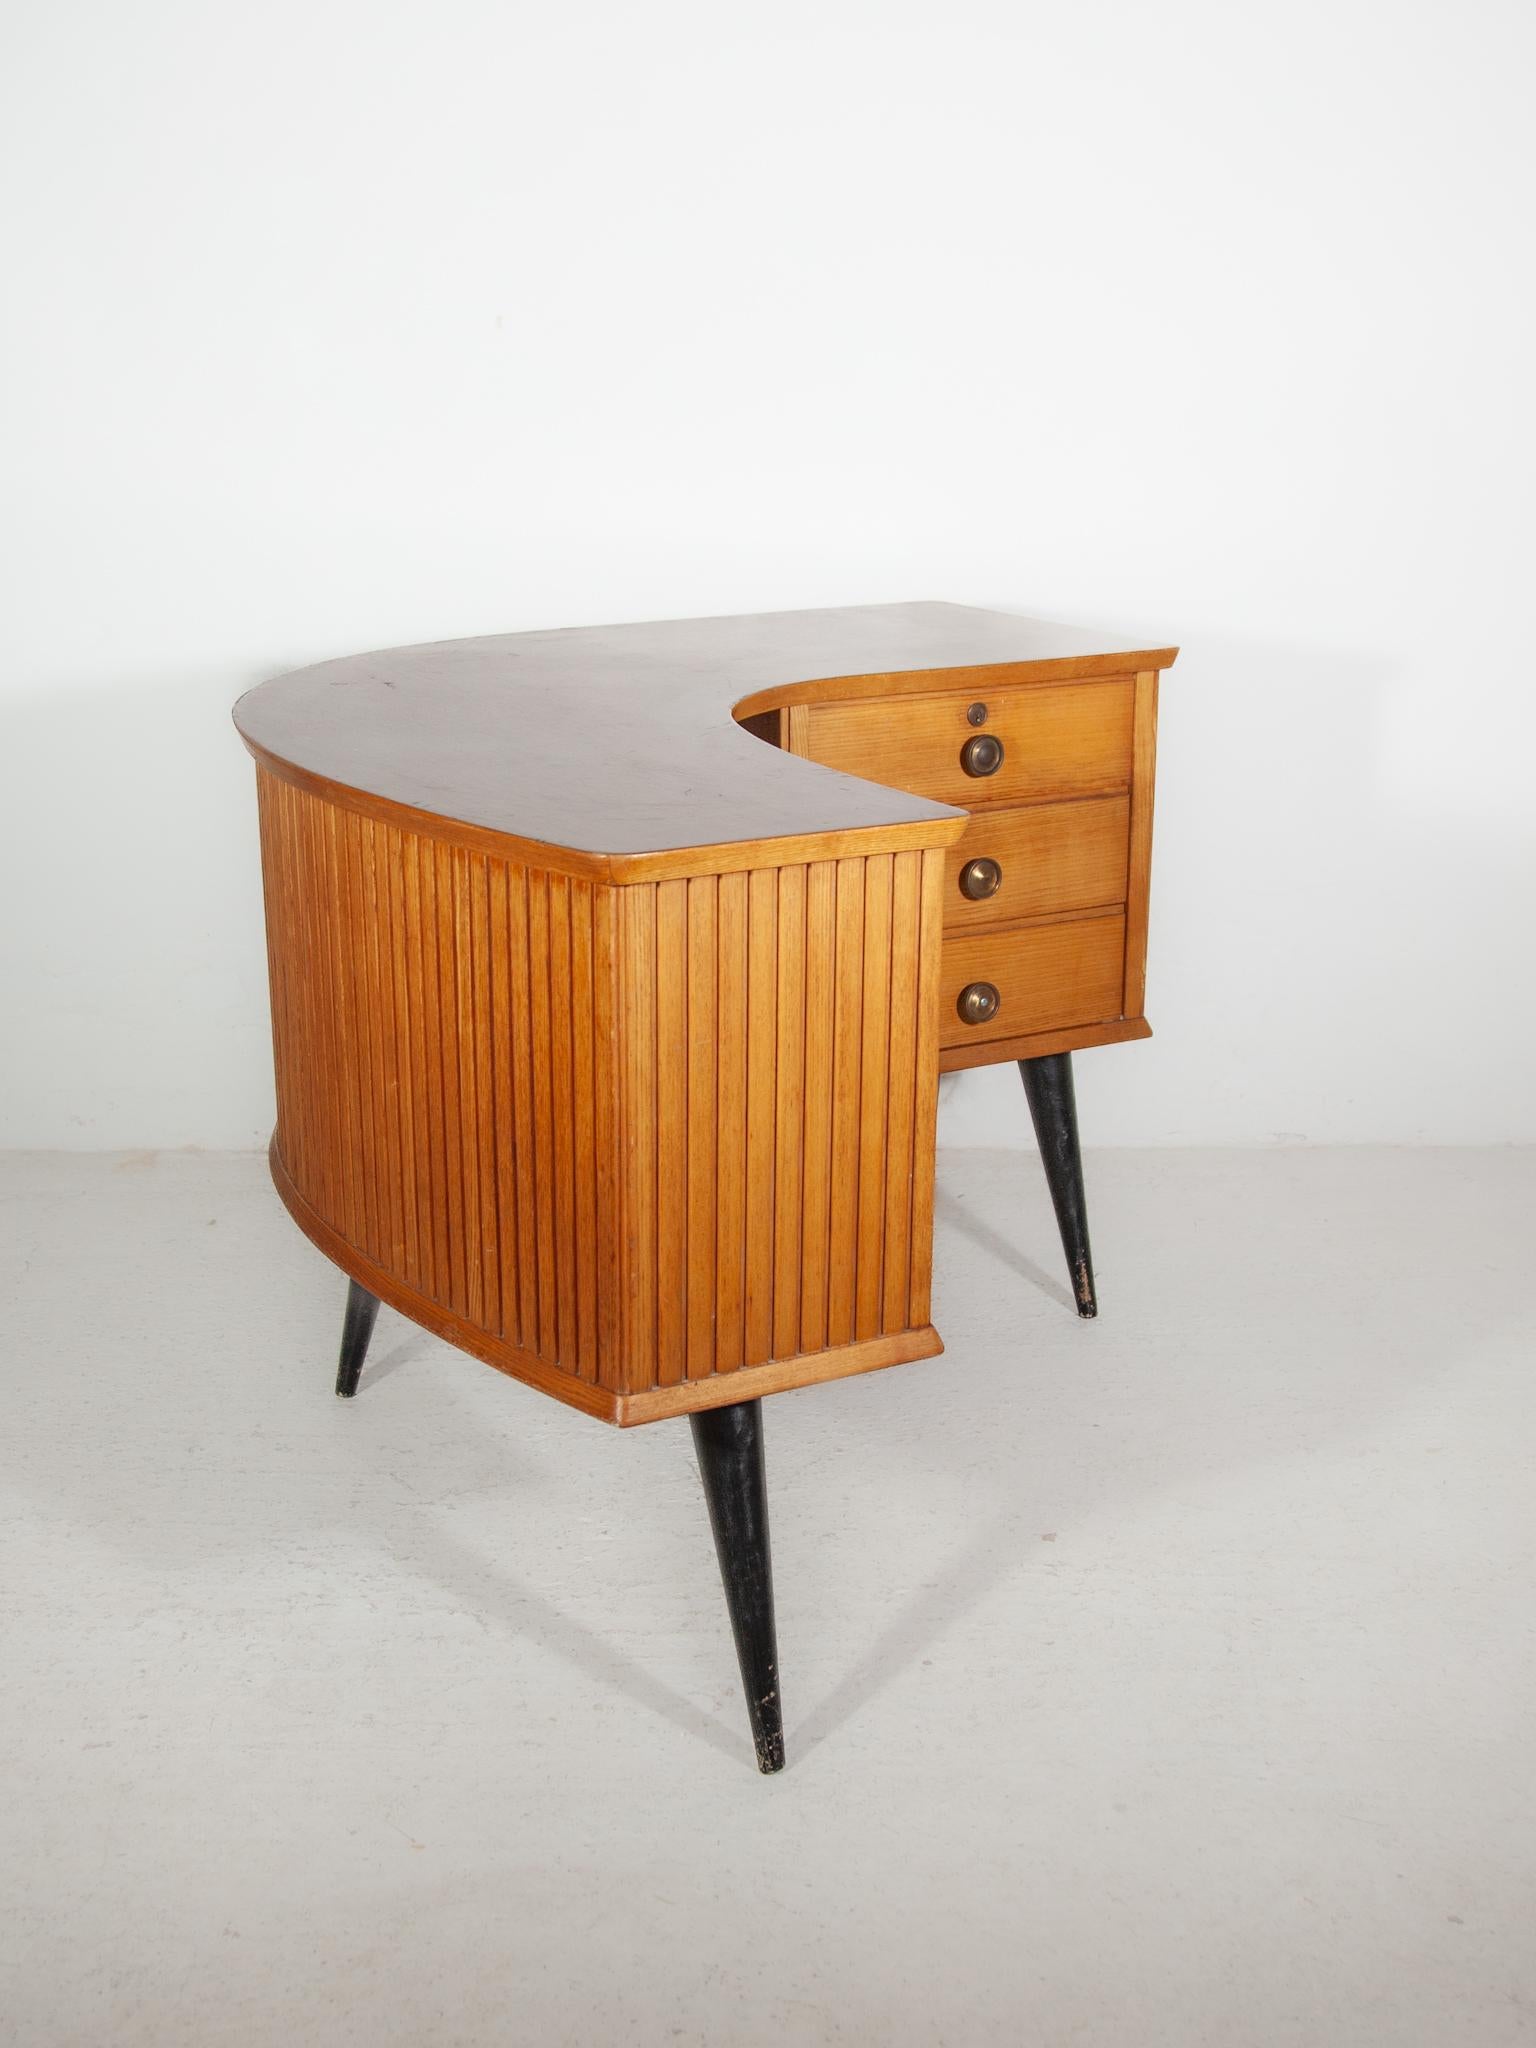 Boomerang Shaped Desk, Shop Counter, 1950s by Alfred Hendrickx For Sale 2